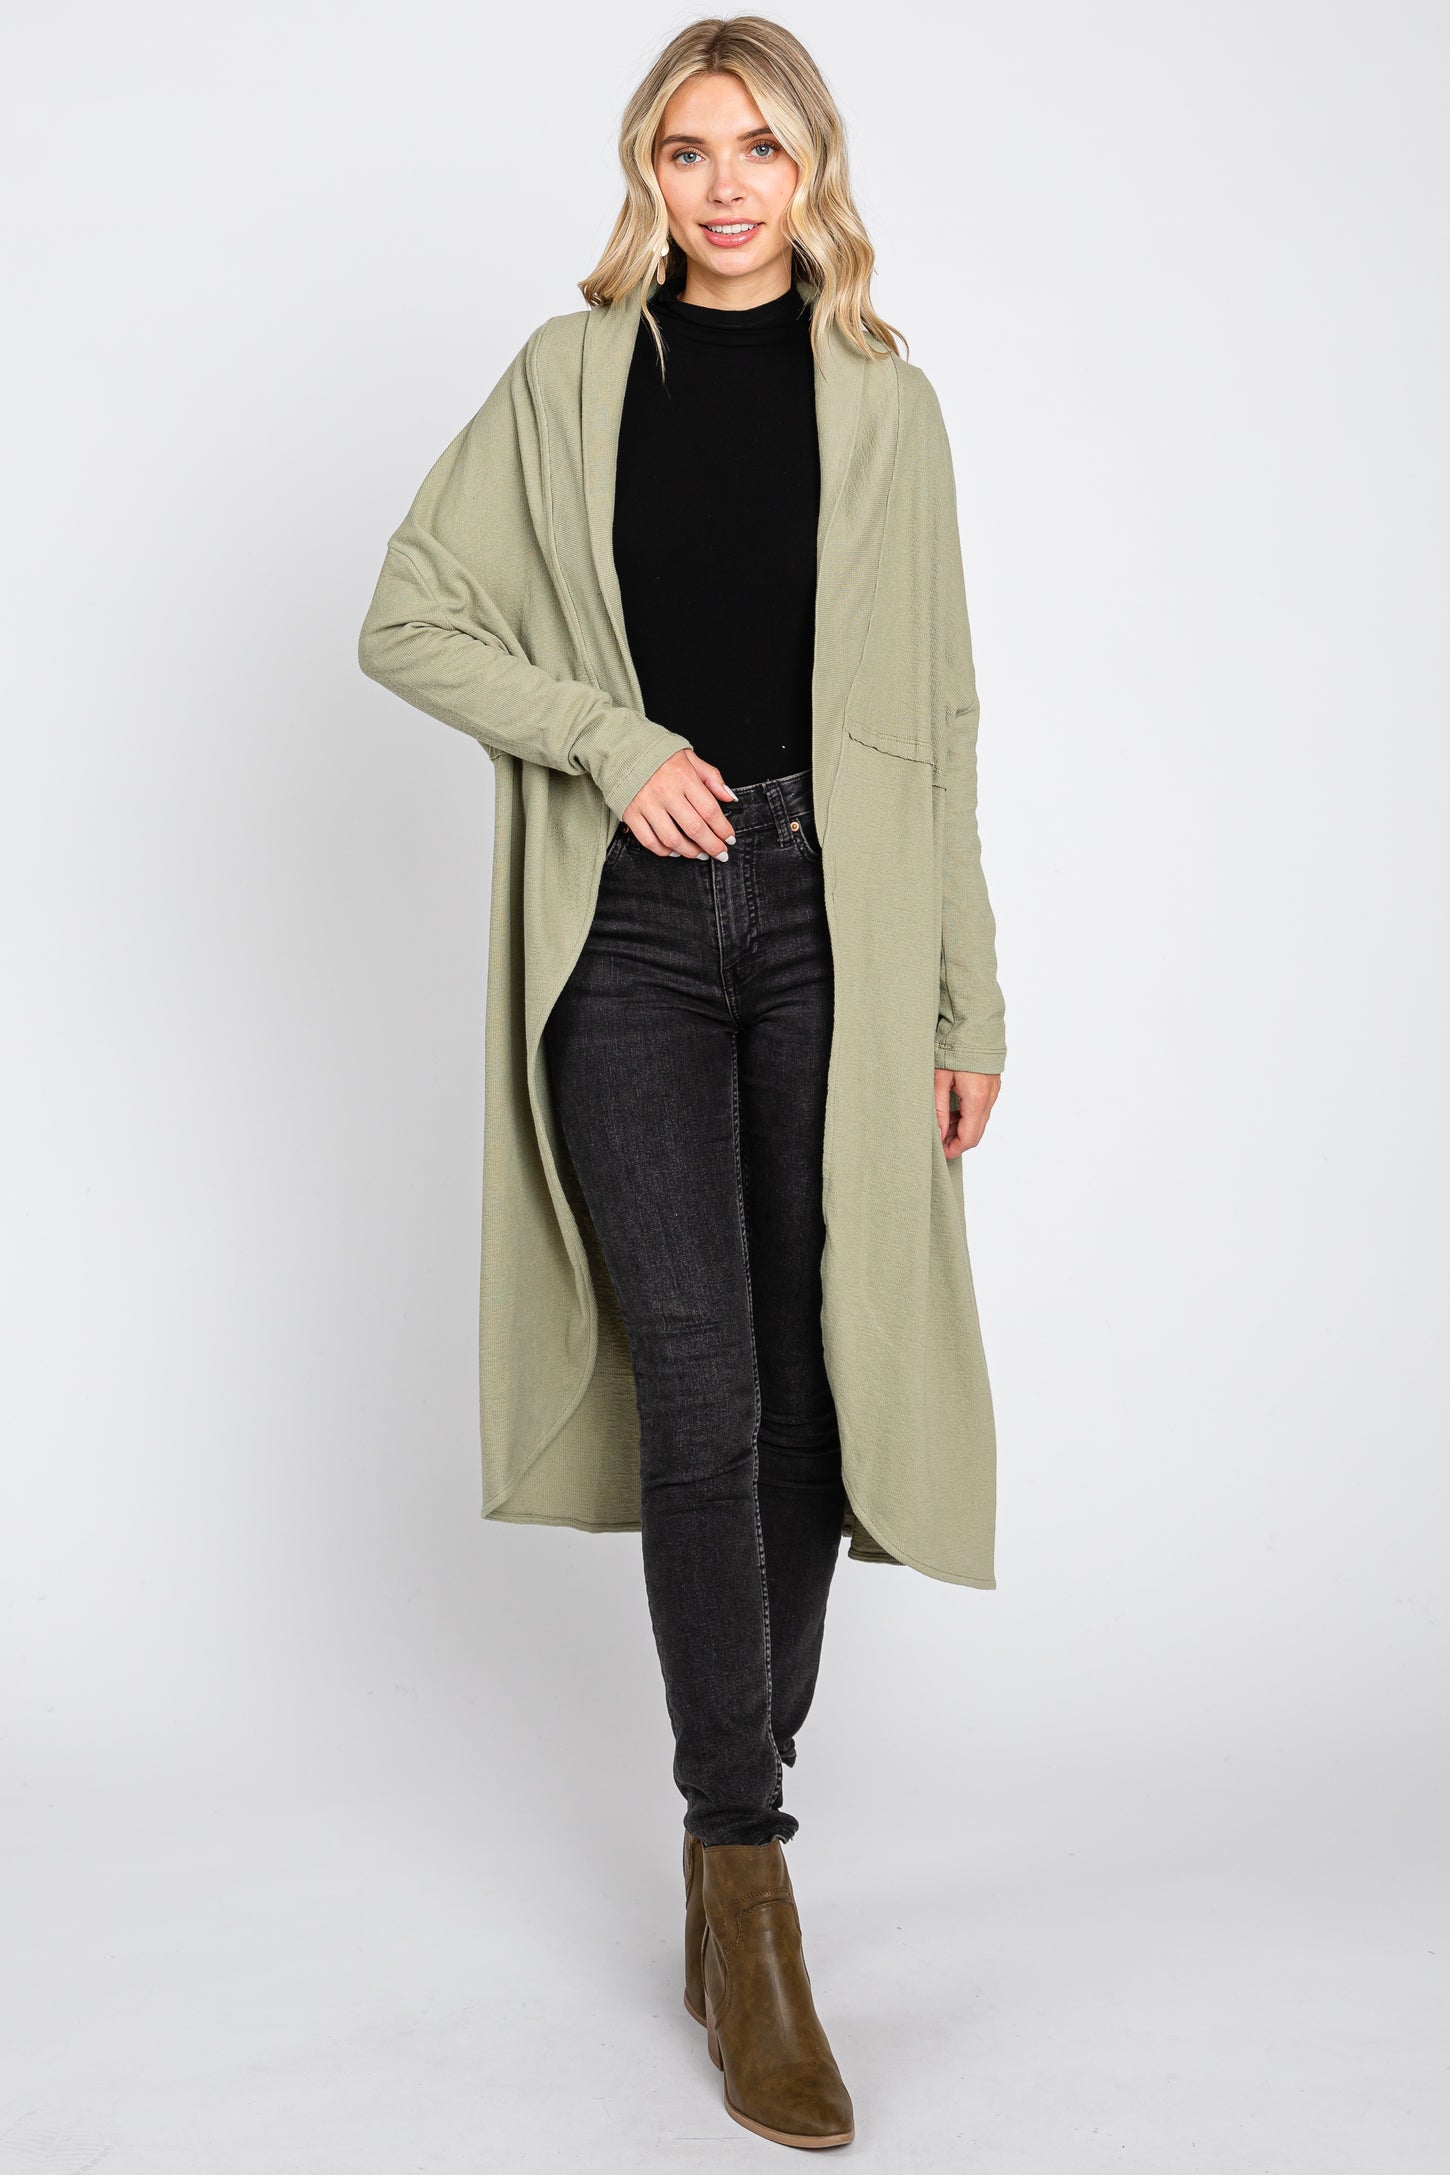 Light Olive Open Front Long Cardigan– PinkBlush